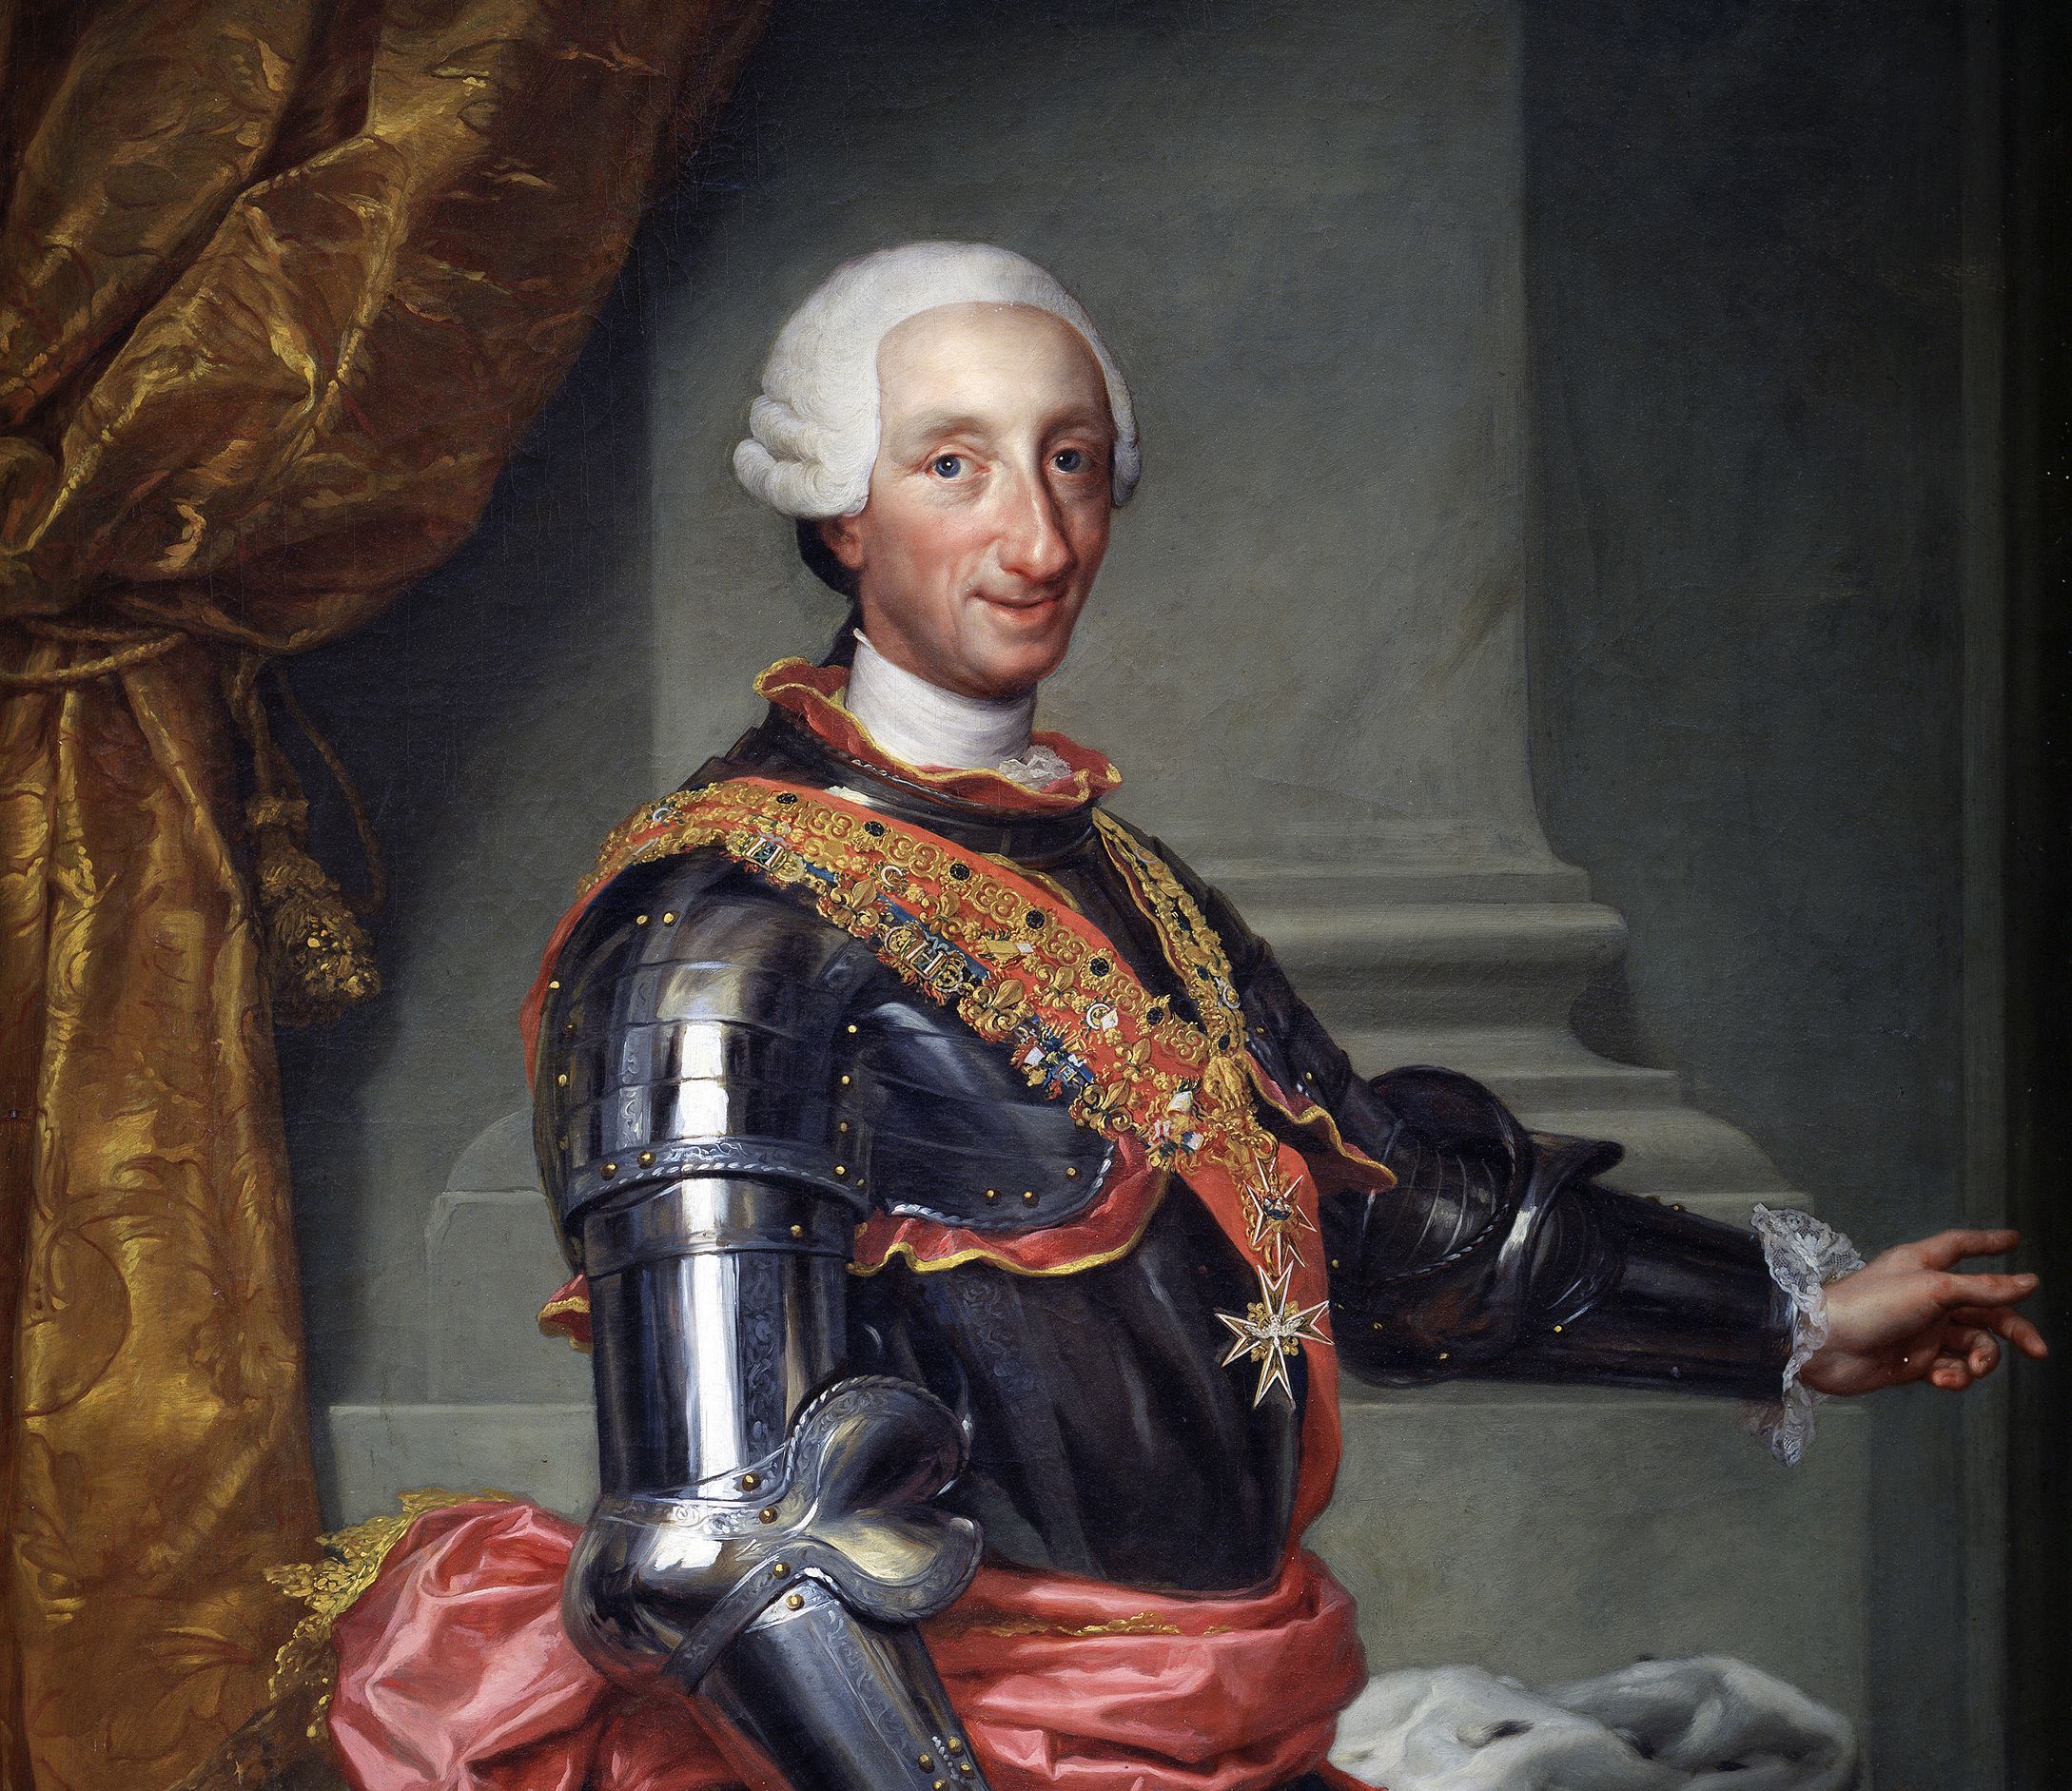 1716: Charles Bourbon: A King who Continually Ruled in Three Different Countries